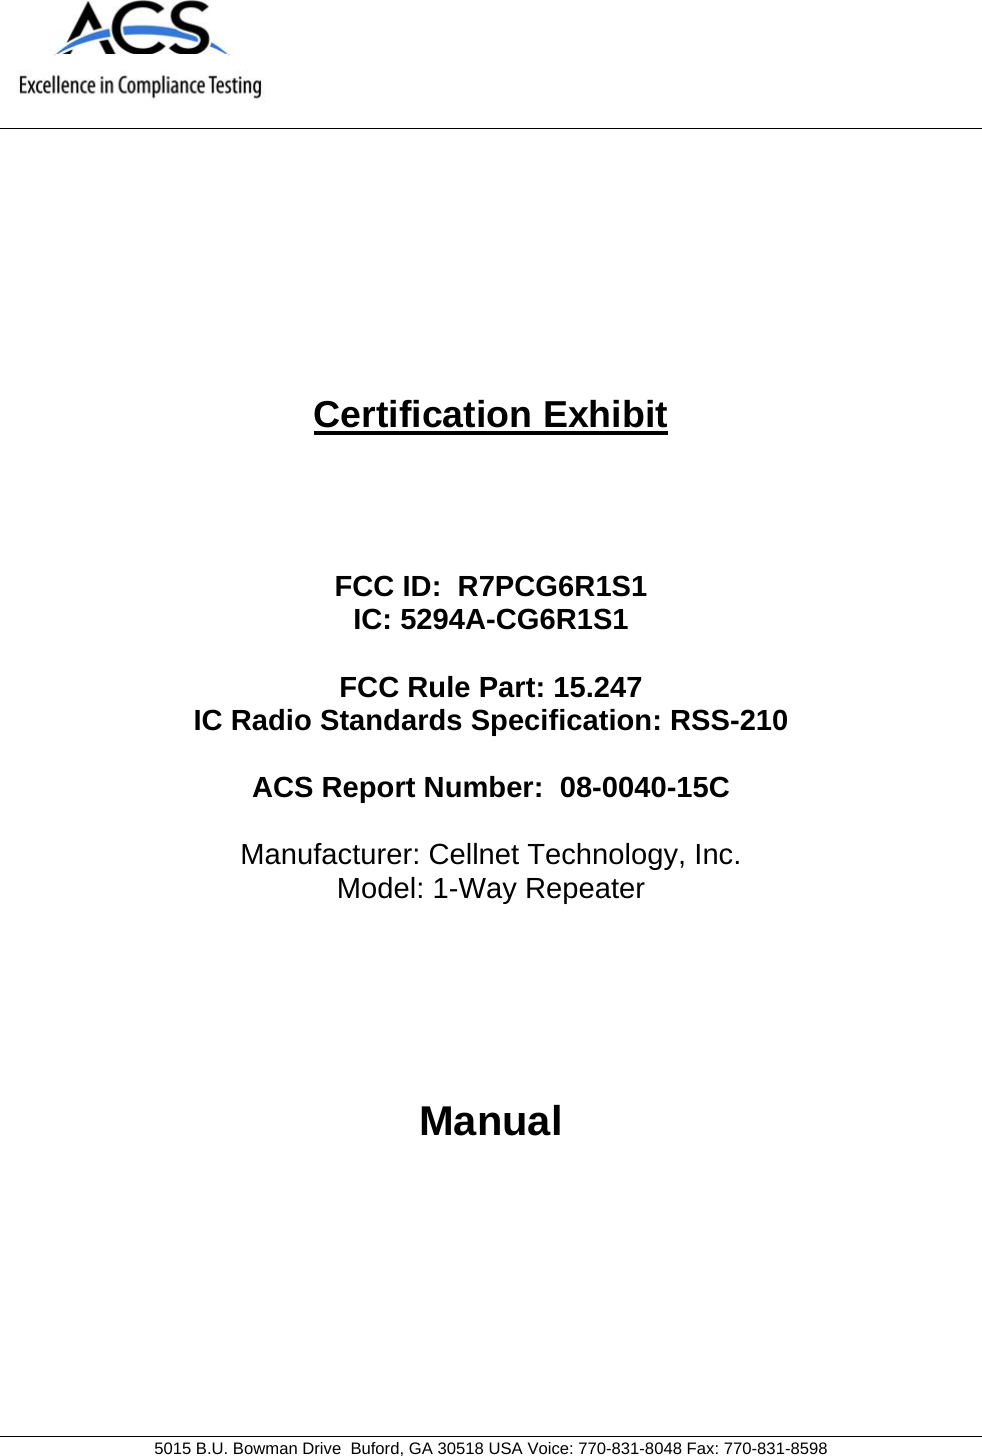     5015 B.U. Bowman Drive  Buford, GA 30518 USA Voice: 770-831-8048 Fax: 770-831-8598   Certification Exhibit     FCC ID:  R7PCG6R1S1 IC: 5294A-CG6R1S1  FCC Rule Part: 15.247 IC Radio Standards Specification: RSS-210  ACS Report Number:  08-0040-15C   Manufacturer: Cellnet Technology, Inc. Model: 1-Way Repeater     Manual  